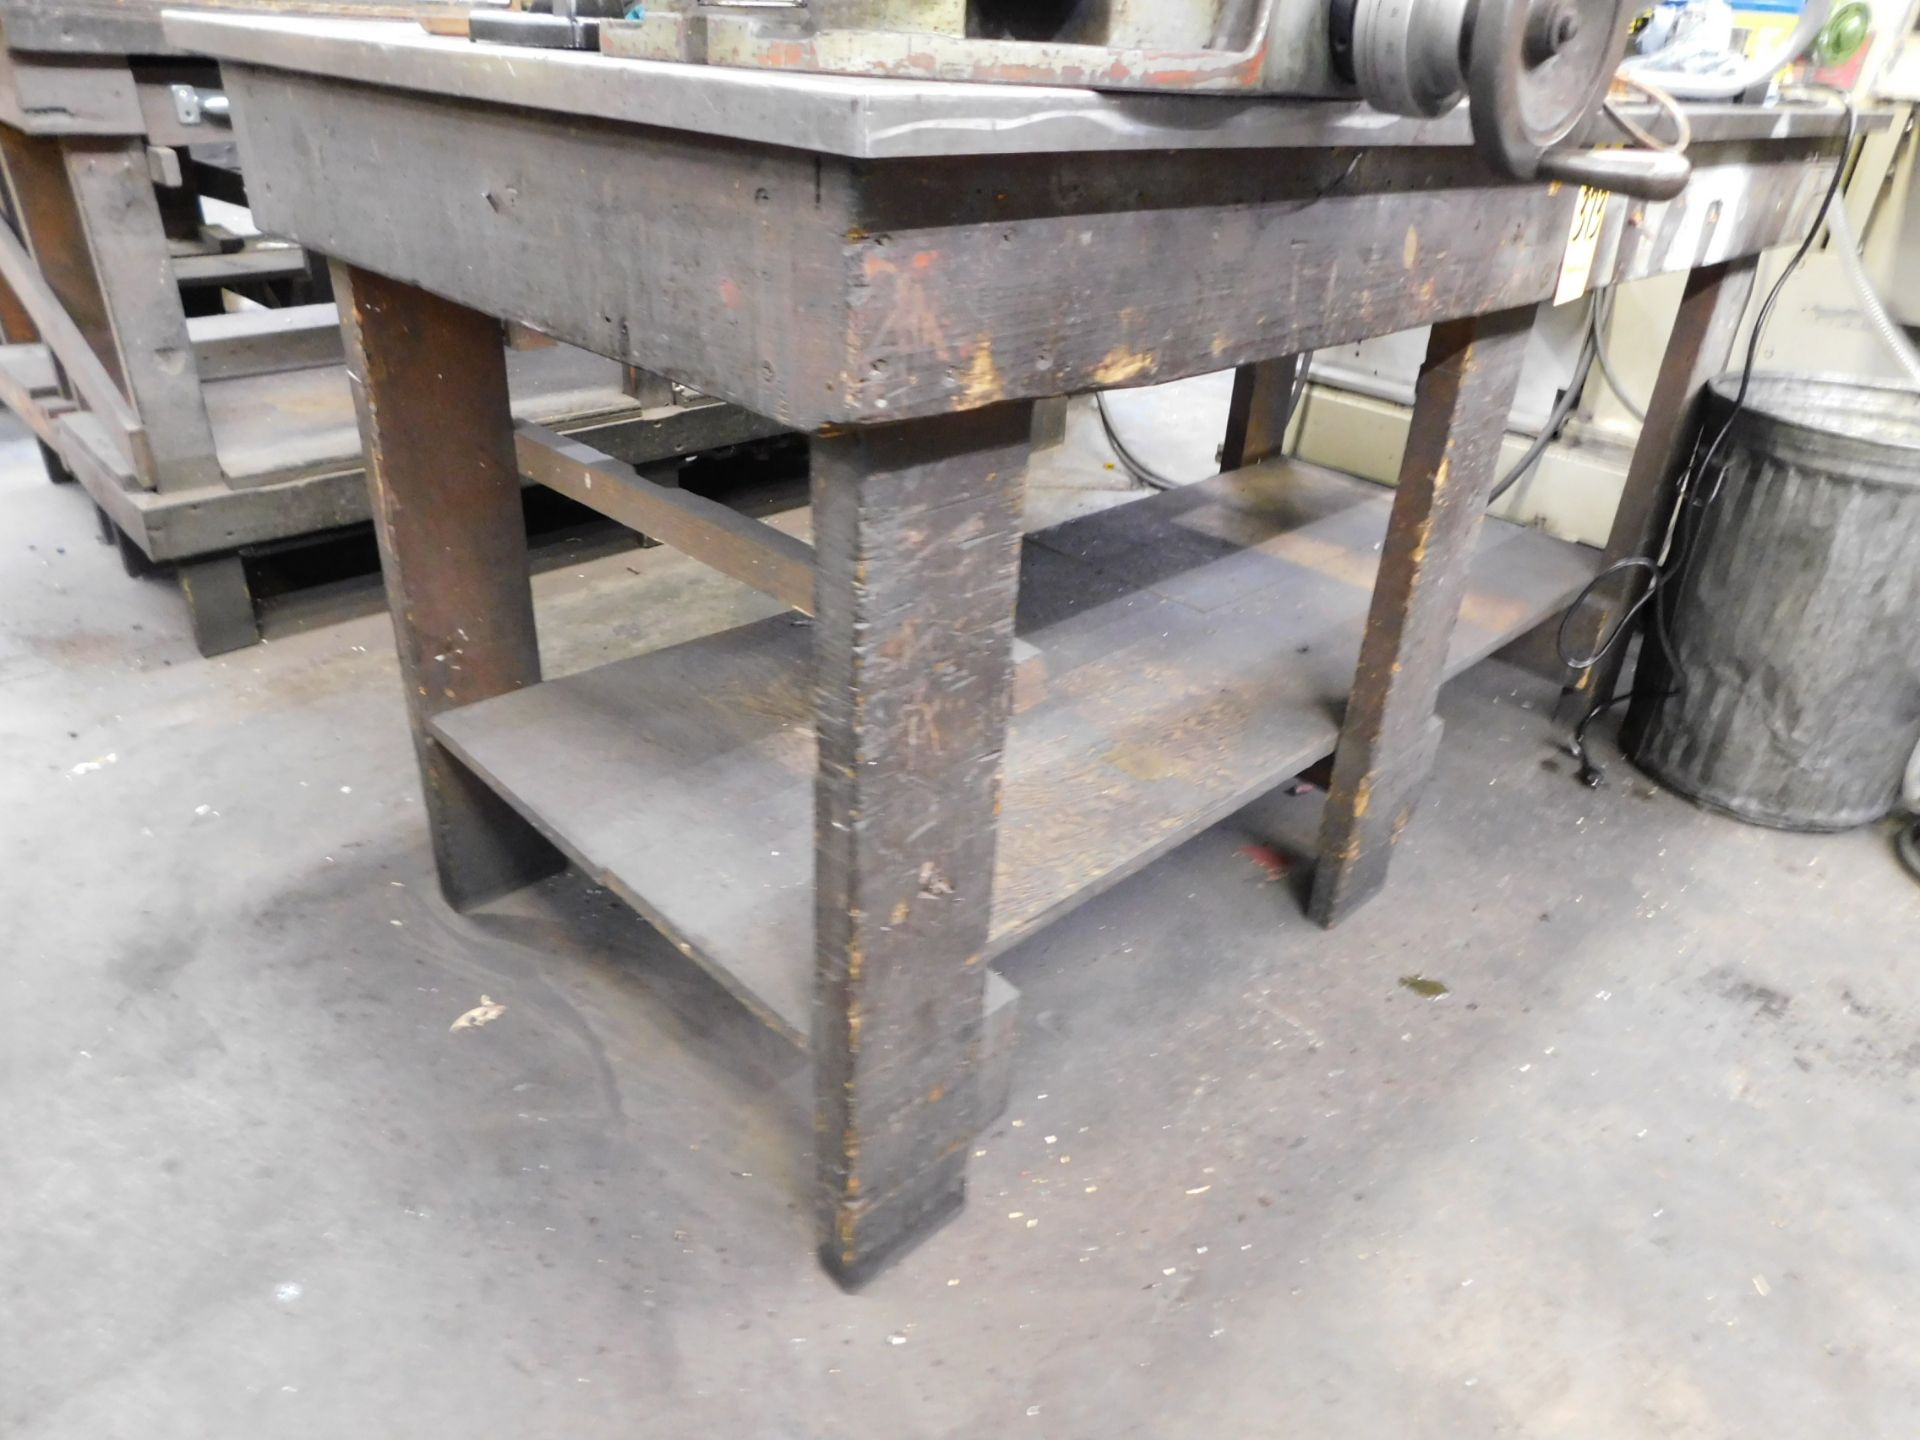 Wooden Shop Table with Metal Top, 36" X 72" X 36" H